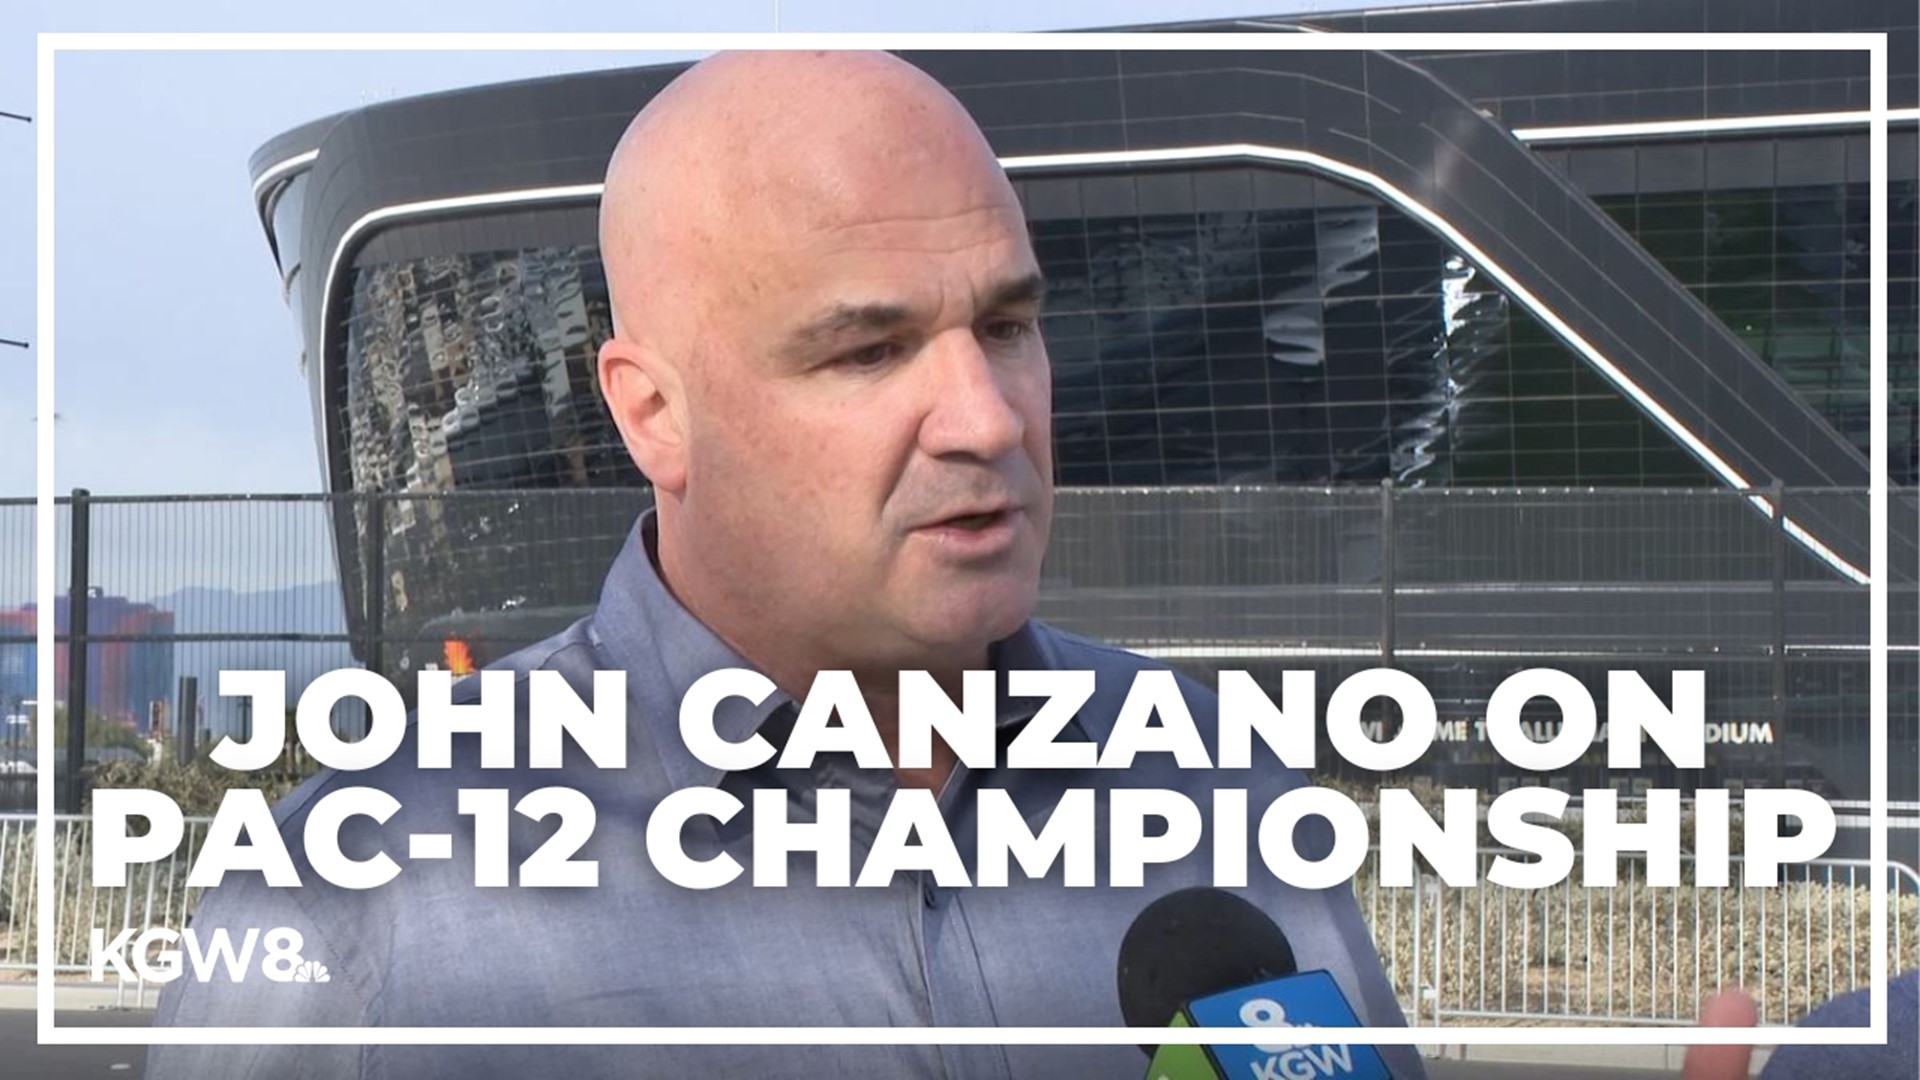 Longtime Portland sports columnist and commentator John Canzano previews the Pac-12 championship game between Oregon and Washington.